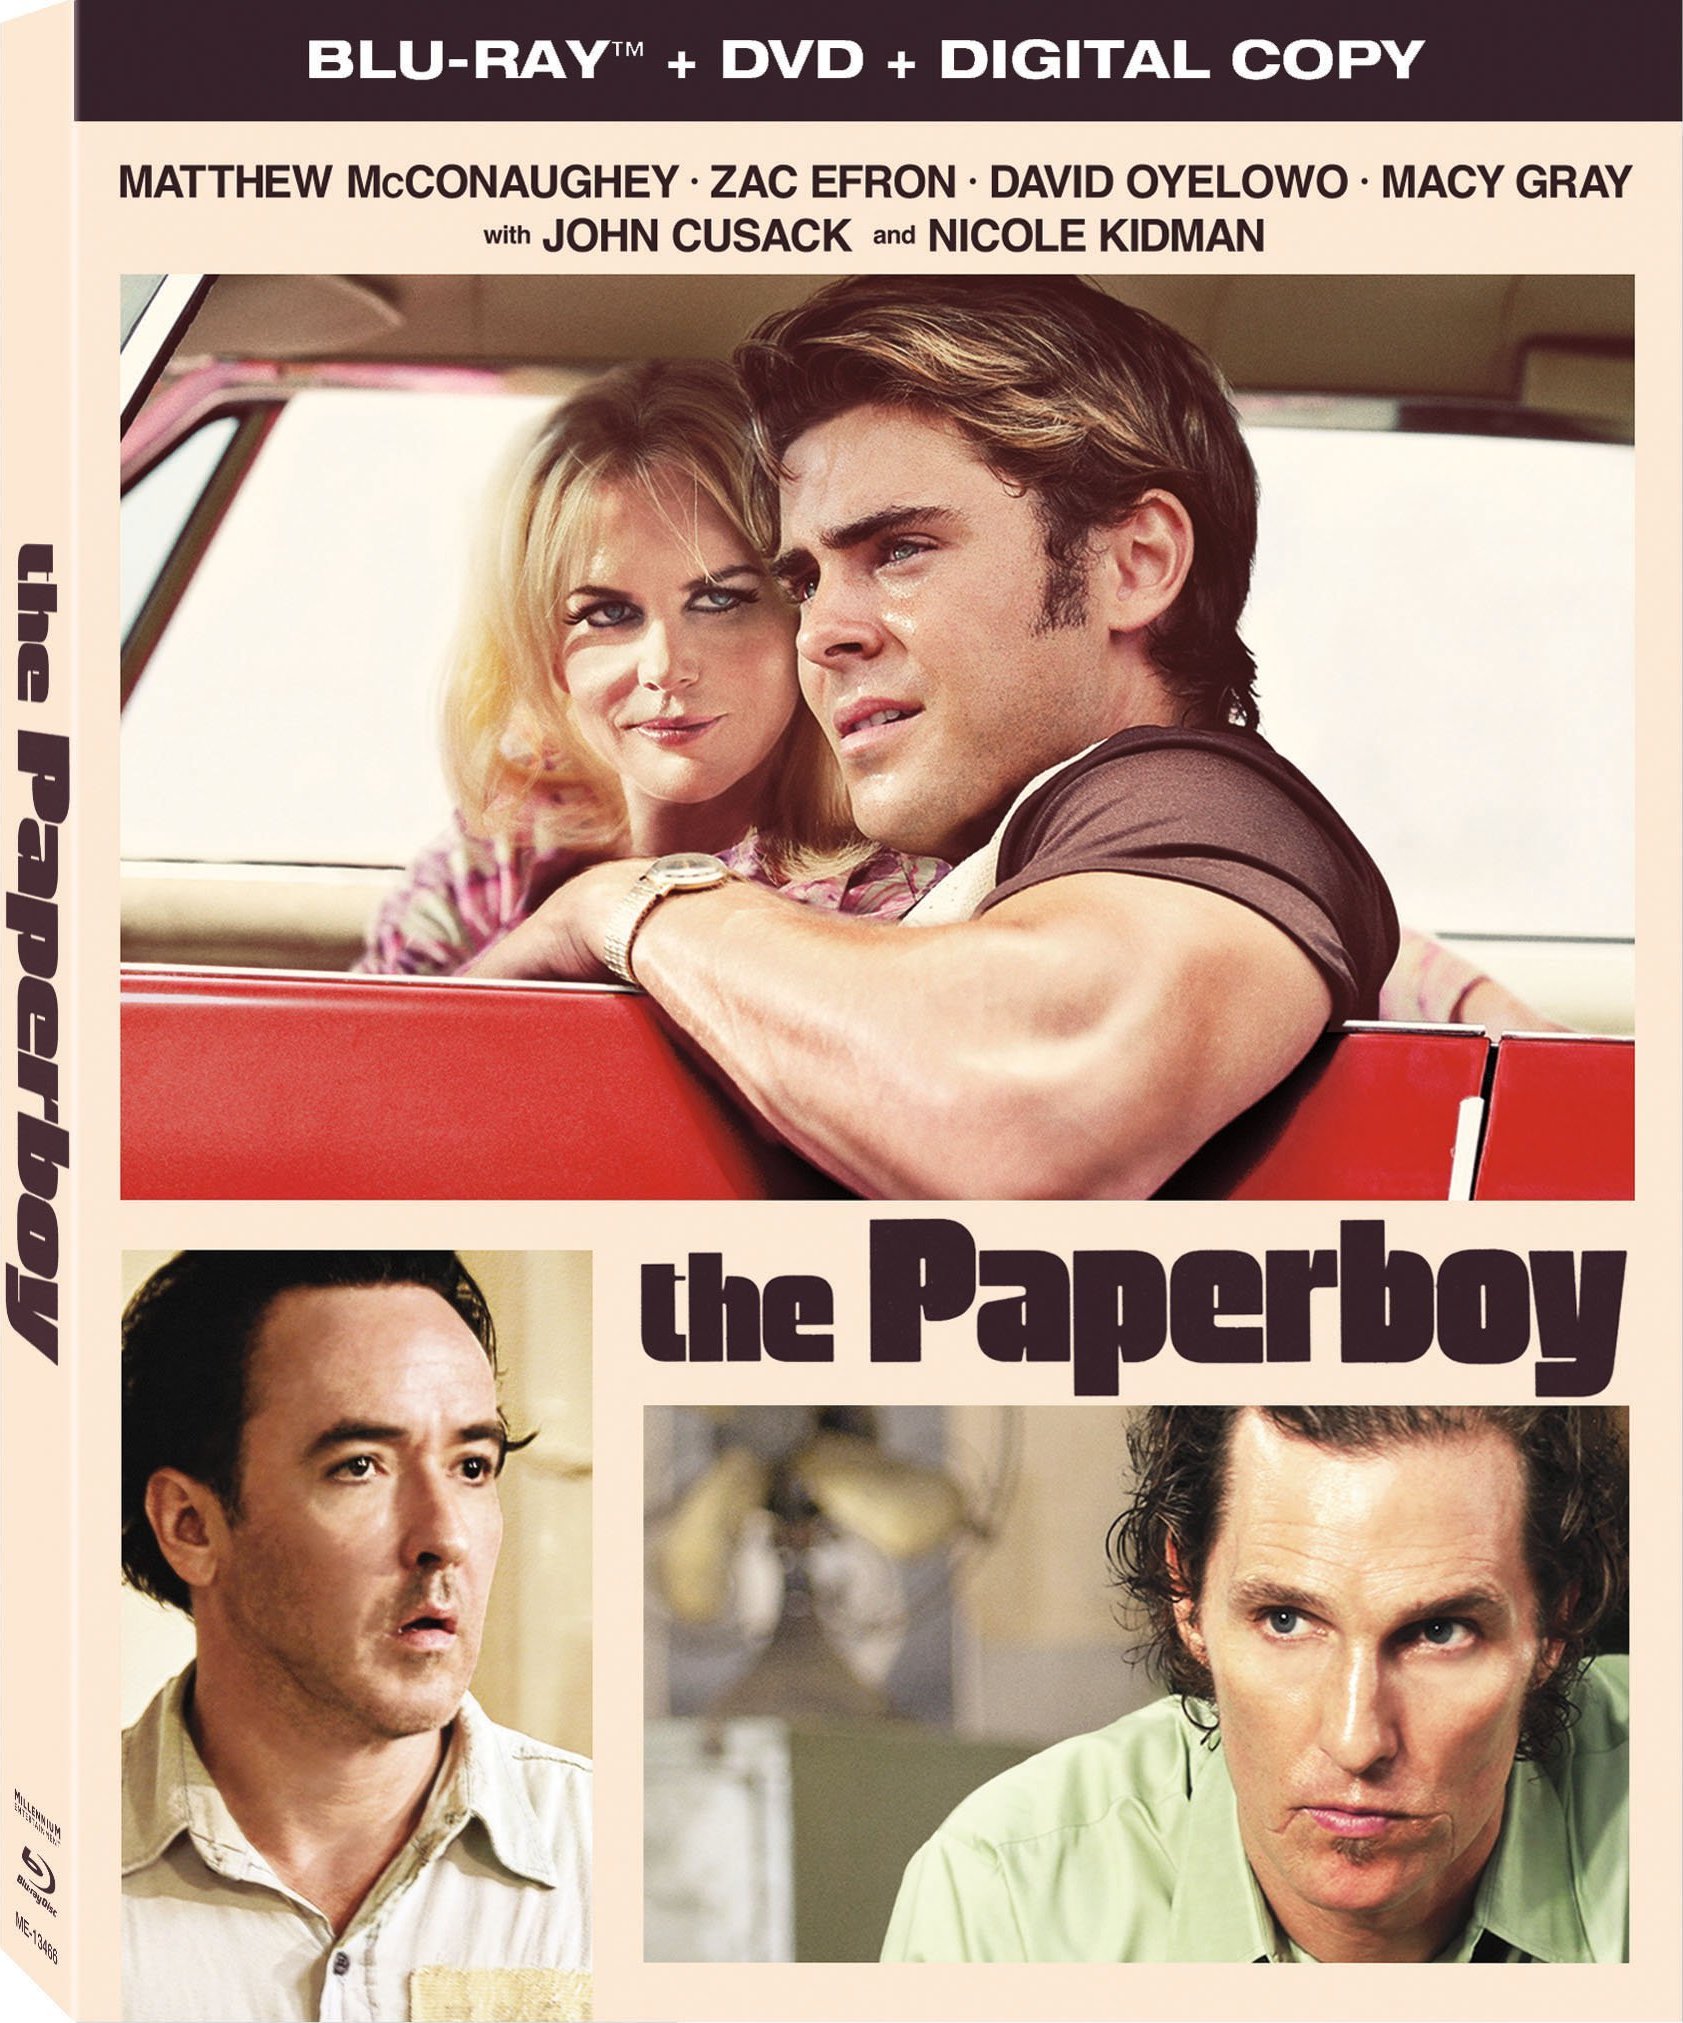 The Paperboy 2012 Full Hd